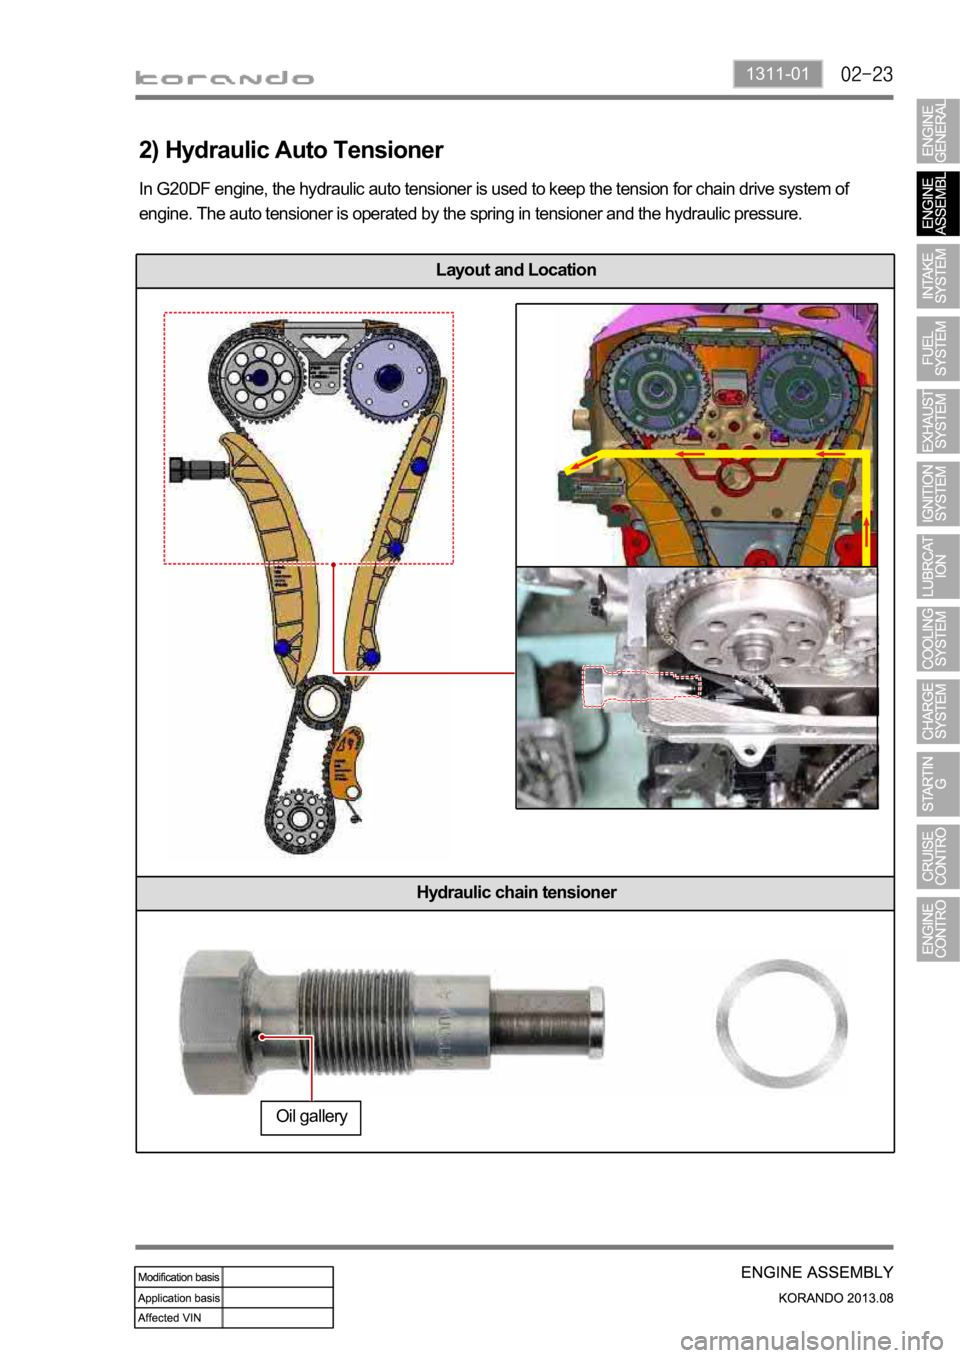 SSANGYONG KORANDO 2013 Owners Guide 1311-01
Layout and Location
Hydraulic chain tensioner
In G20DF engine, the hydraulic auto tensioner is used to keep the tension for chain drive system of 
engine. The auto tensioner is operated by the